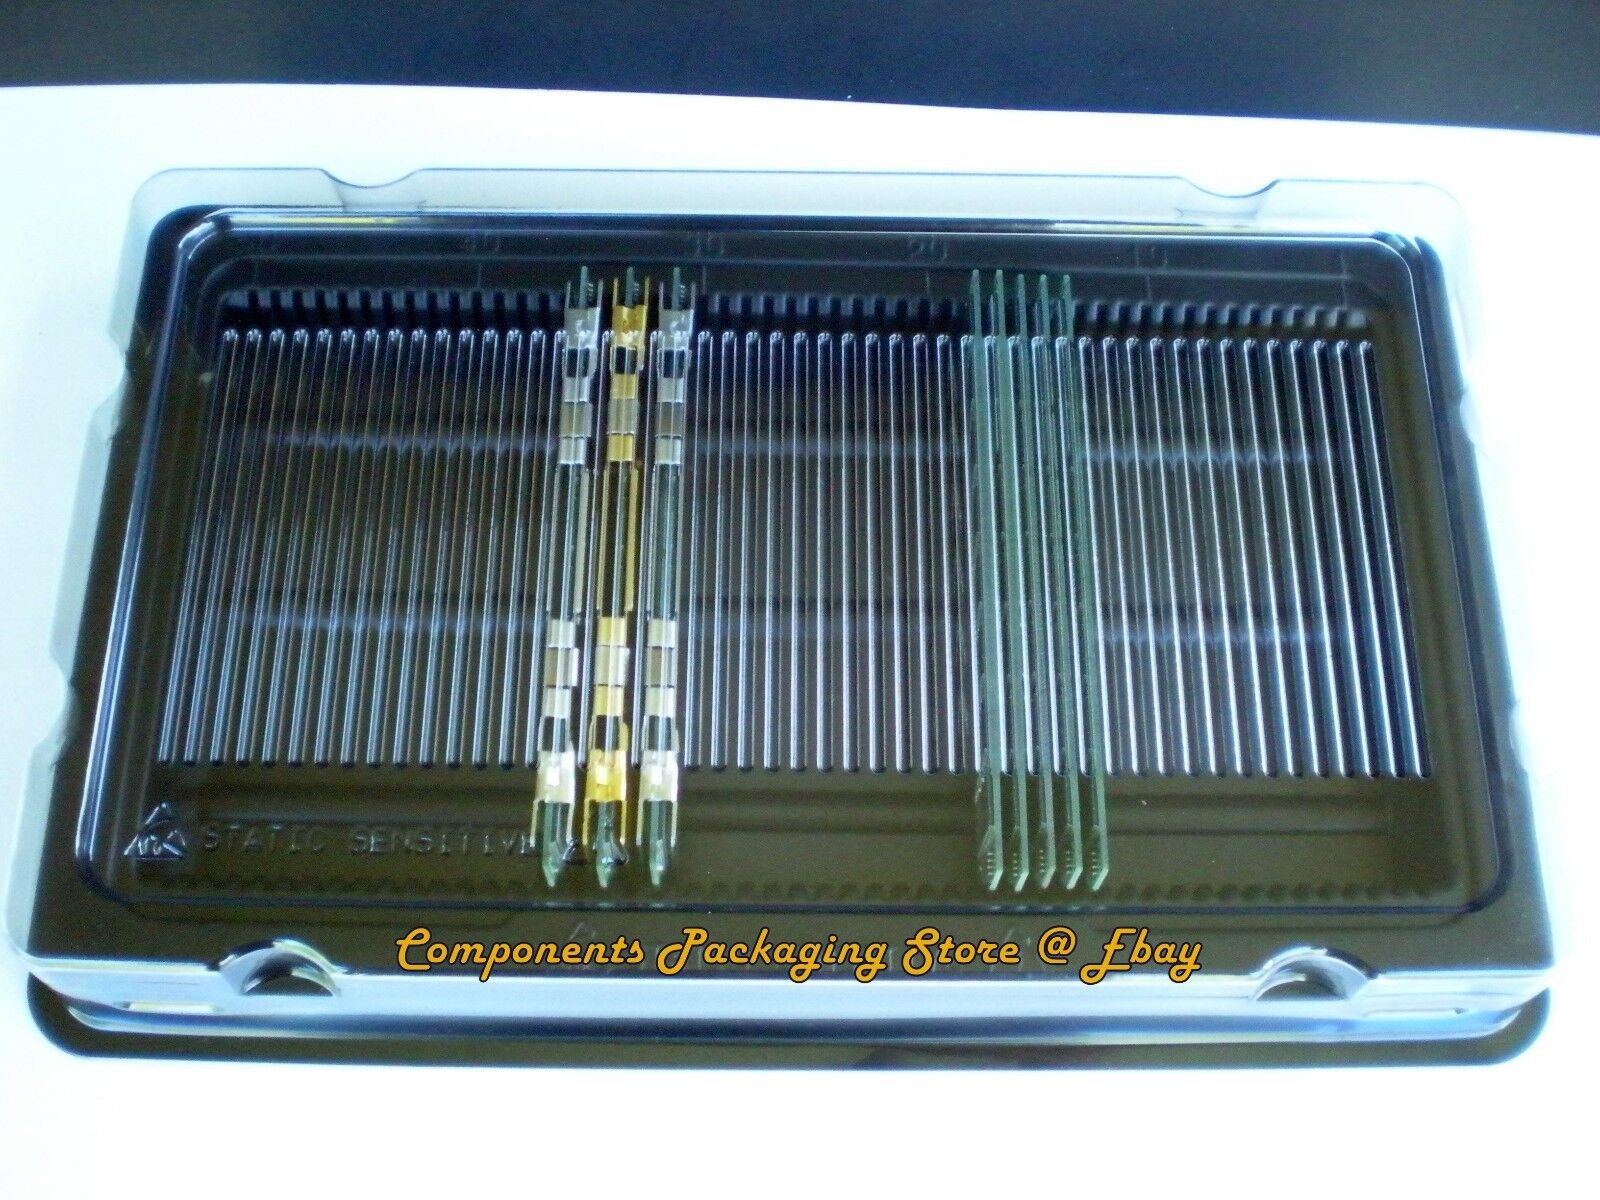 2 - RAM DRAM Tray-Container Box For Server PC Memory DIMM Modules - Fits 100 NEW